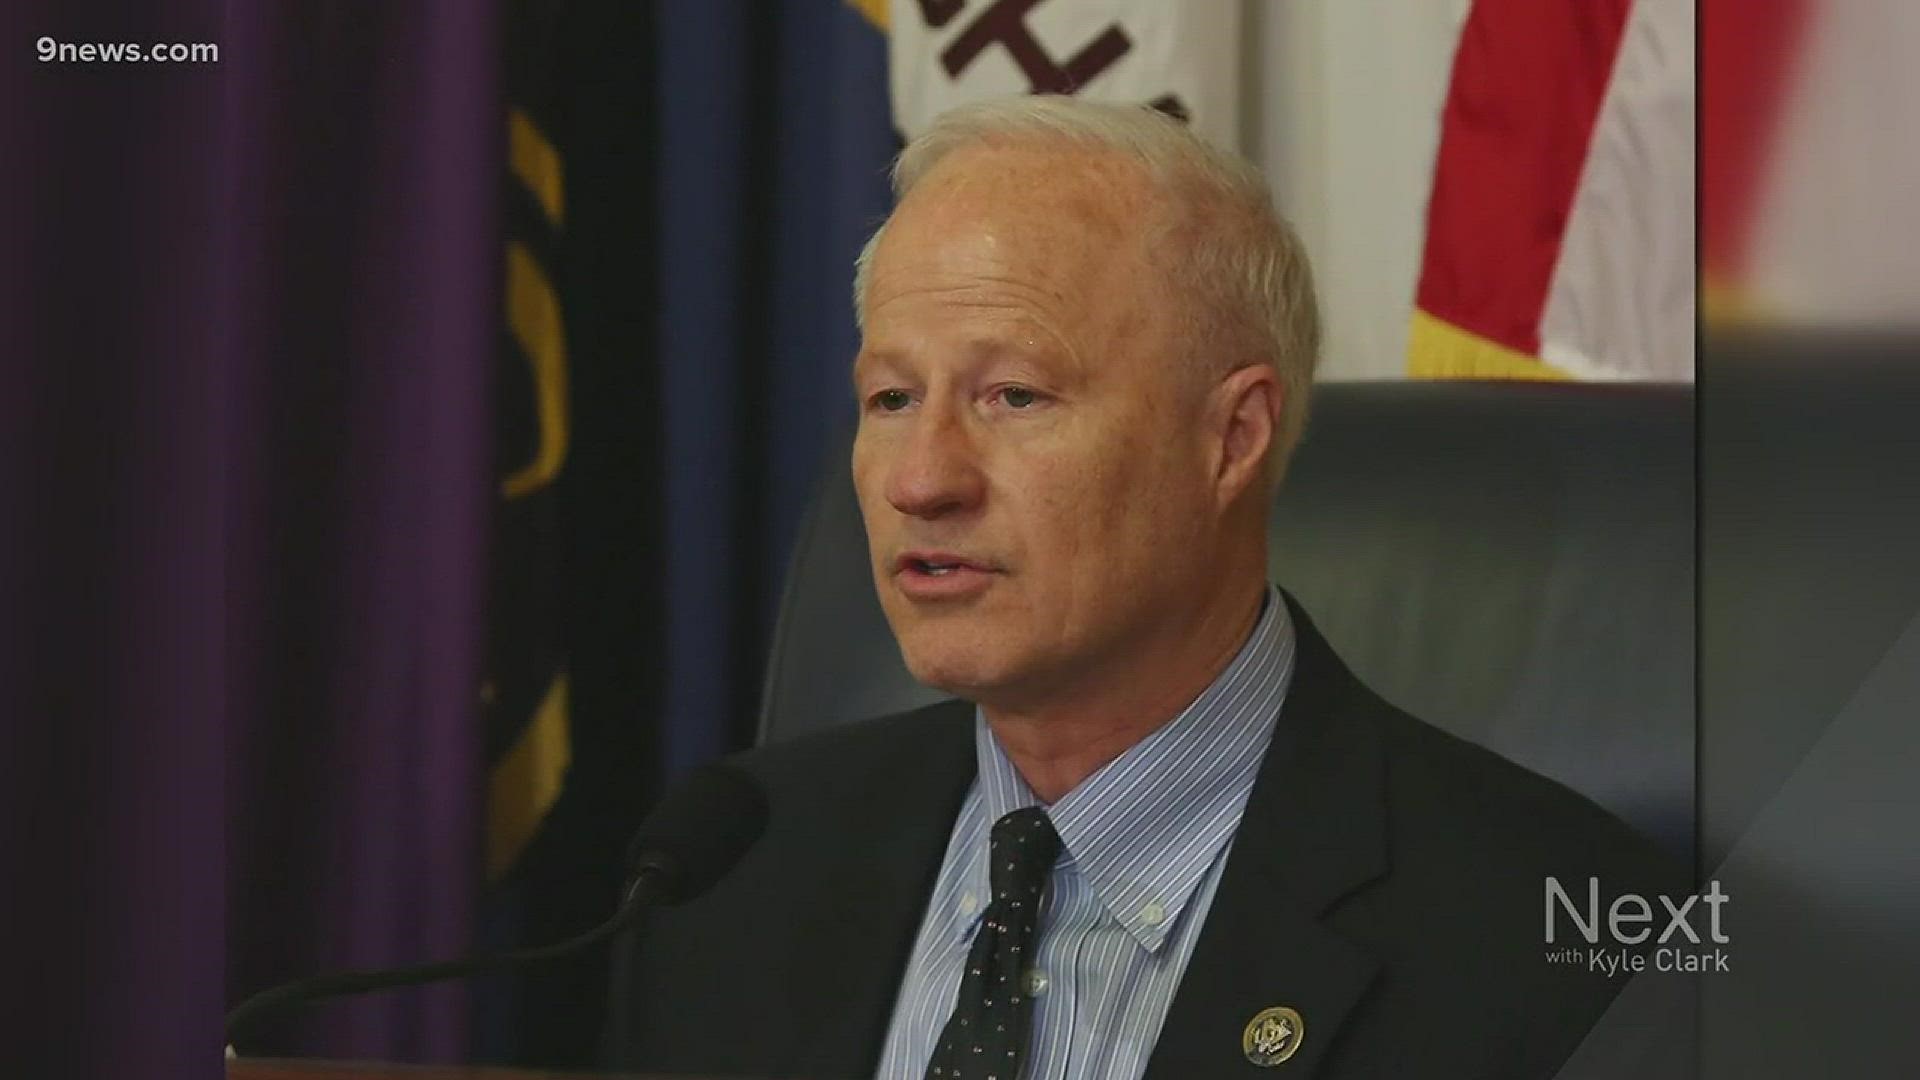 Former Republican Rep. Mike Coffman has joined the race to become the next mayor of Aurora.